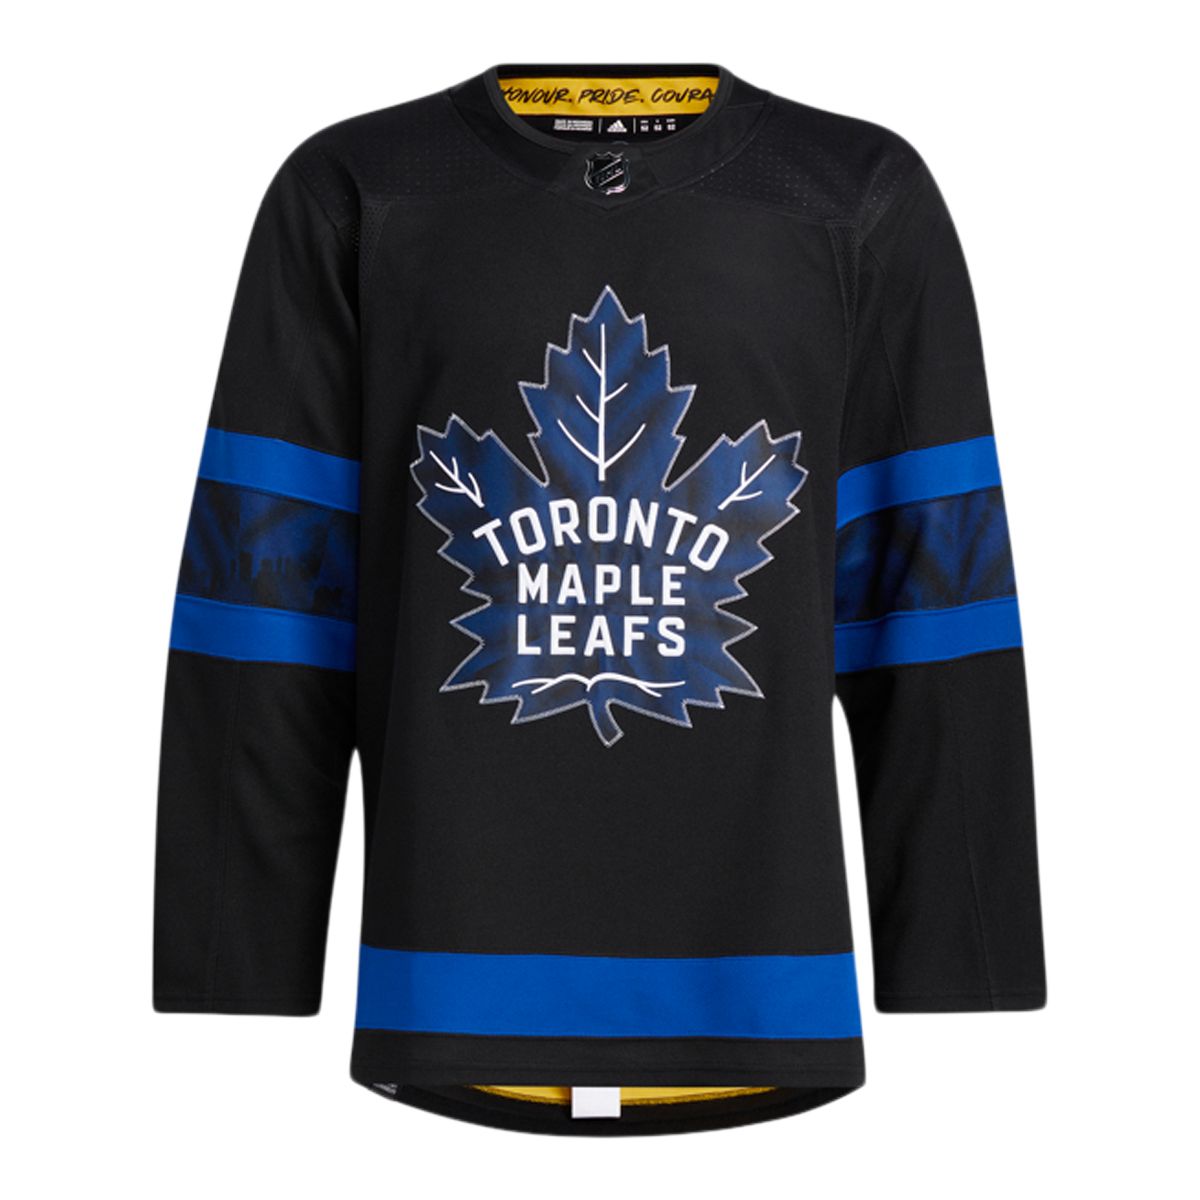 Love it or Leaf it: Toronto teams up with Justin Bieber for new jerseys